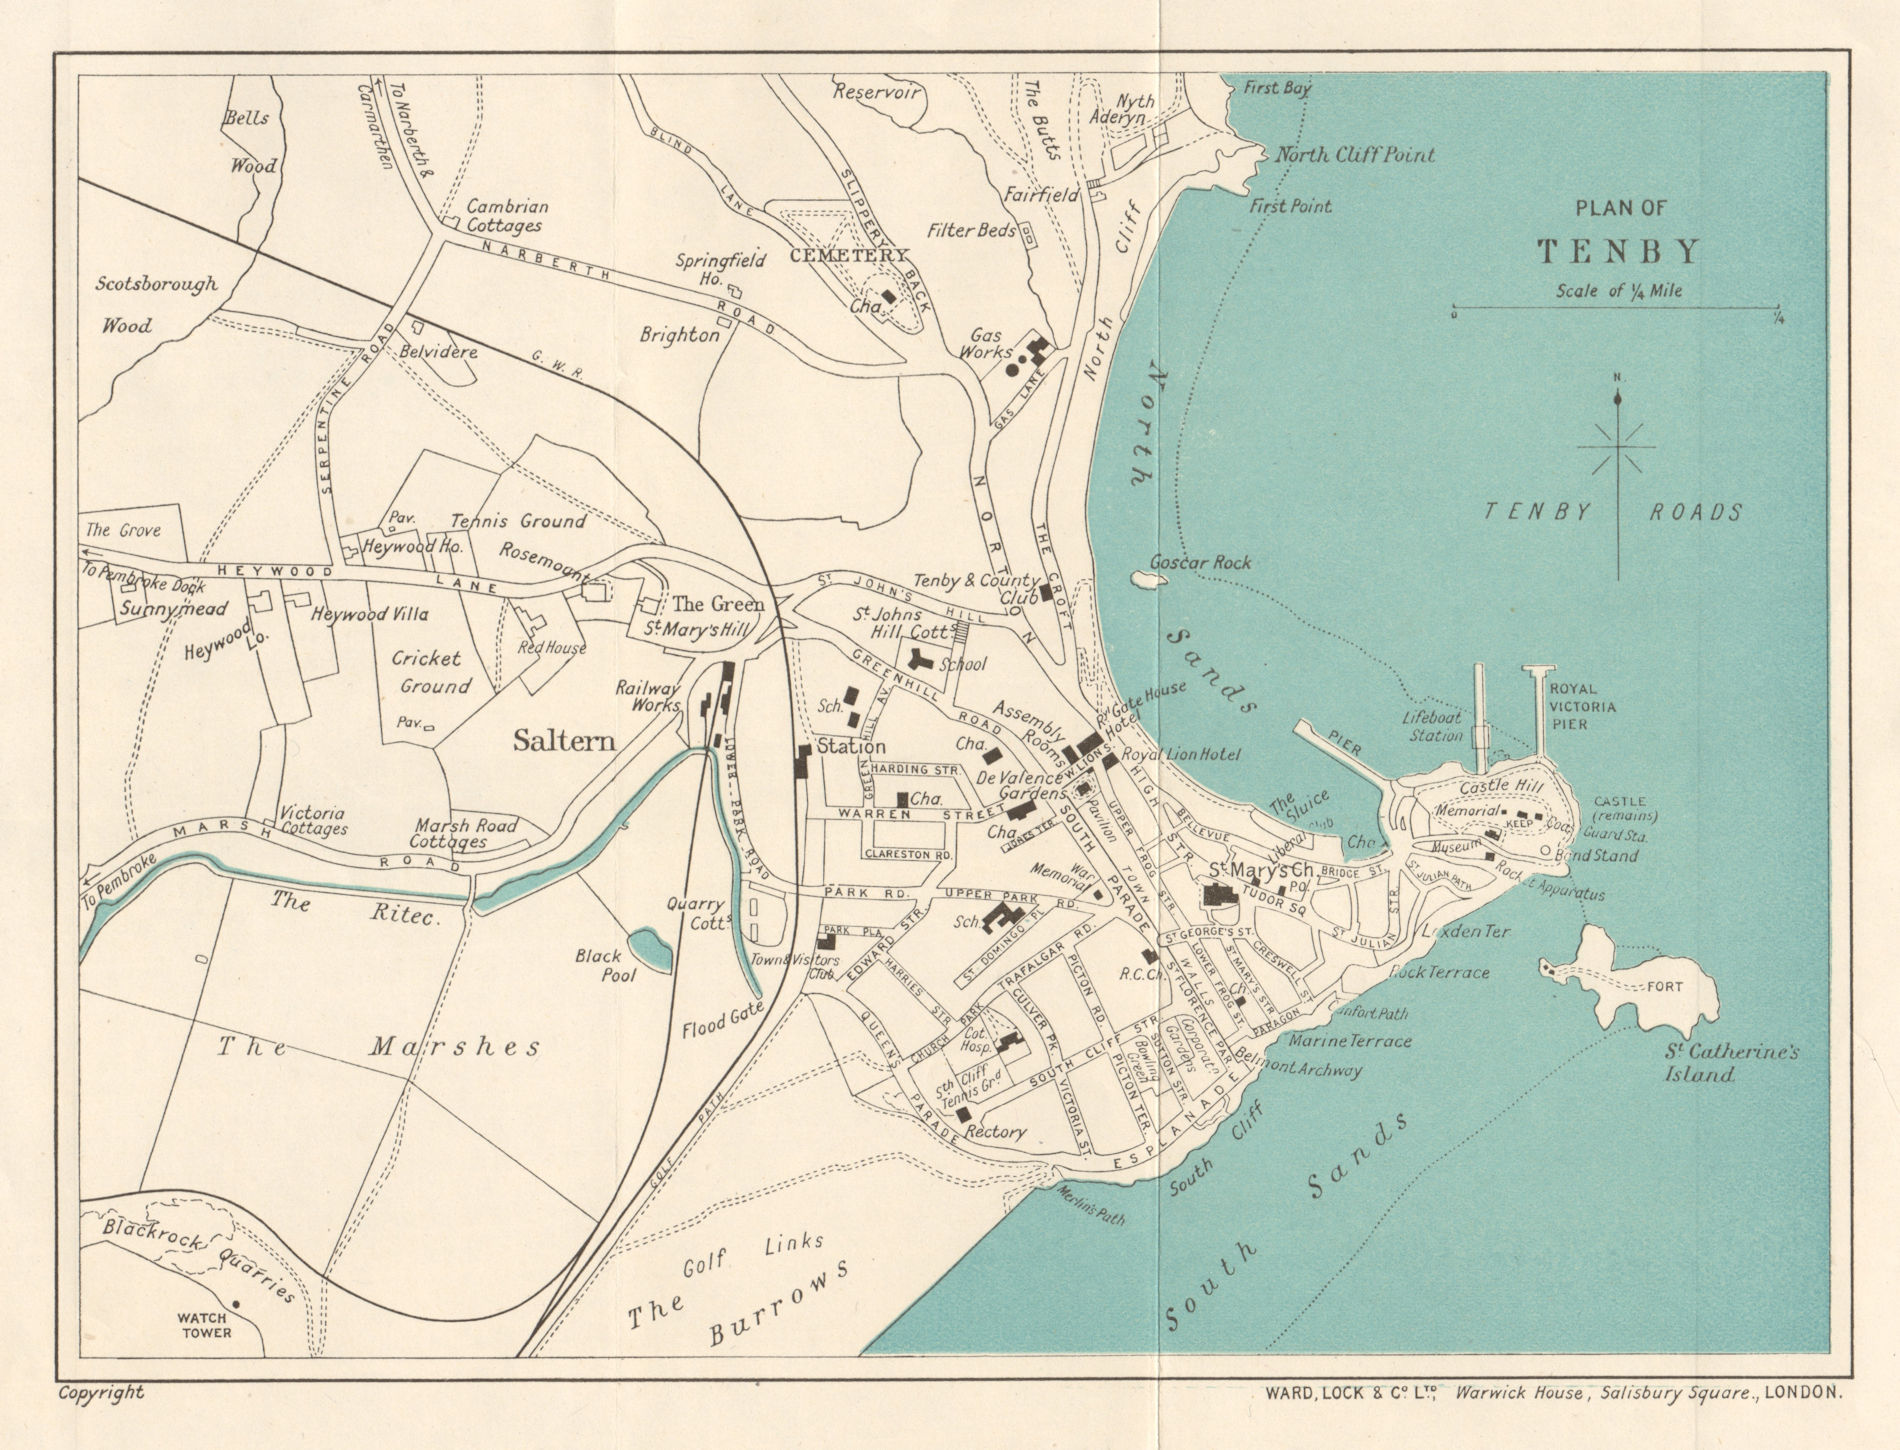 Associate Product TENBY vintage tourist town city resort plan. Wales. WARD LOCK 1925 old map